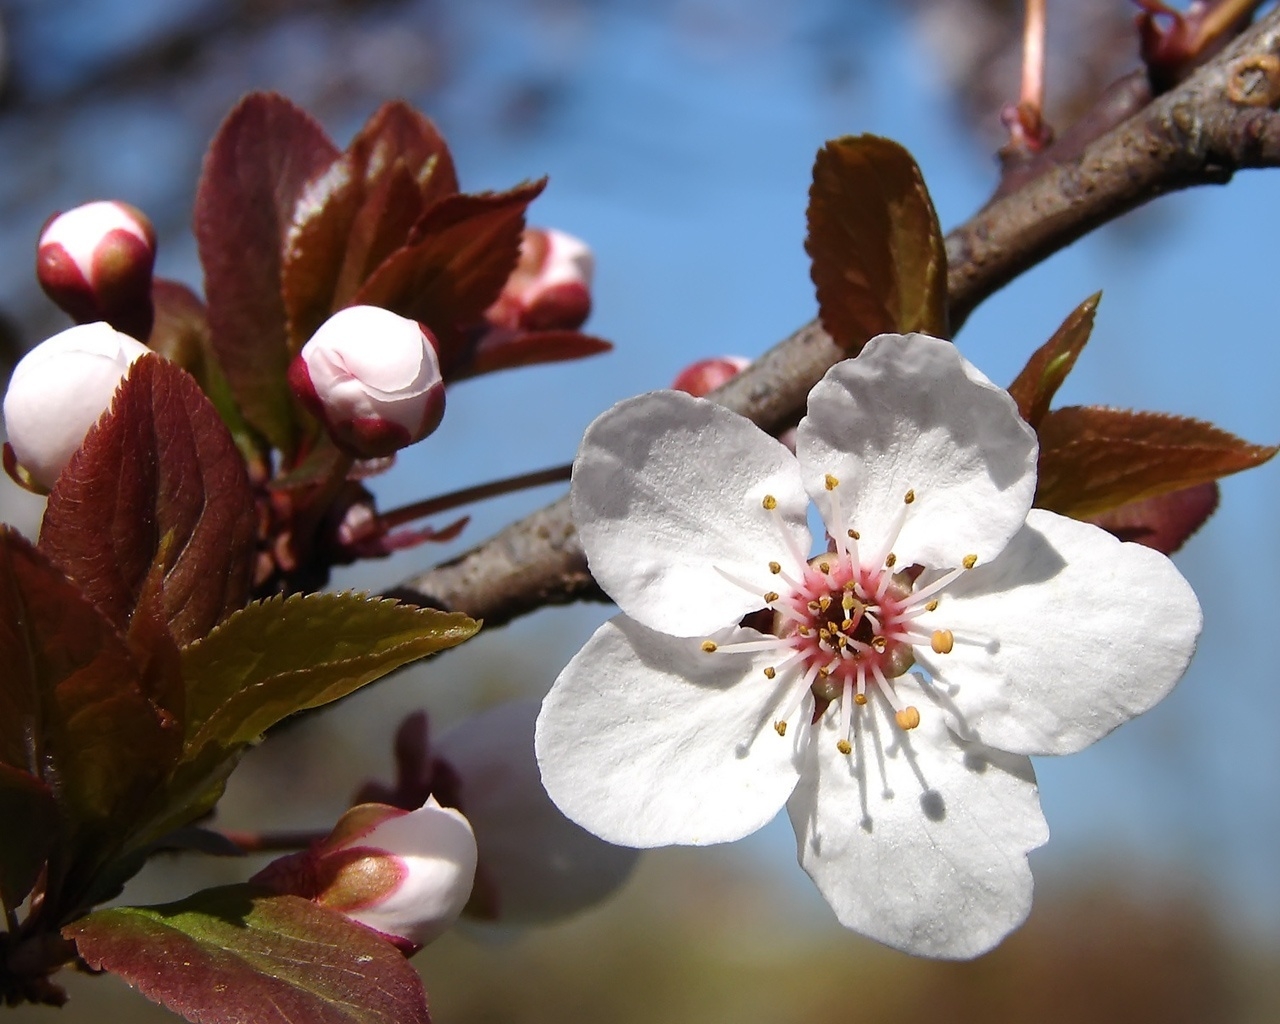 Plum tree blossoms for 1280 x 1024 resolution